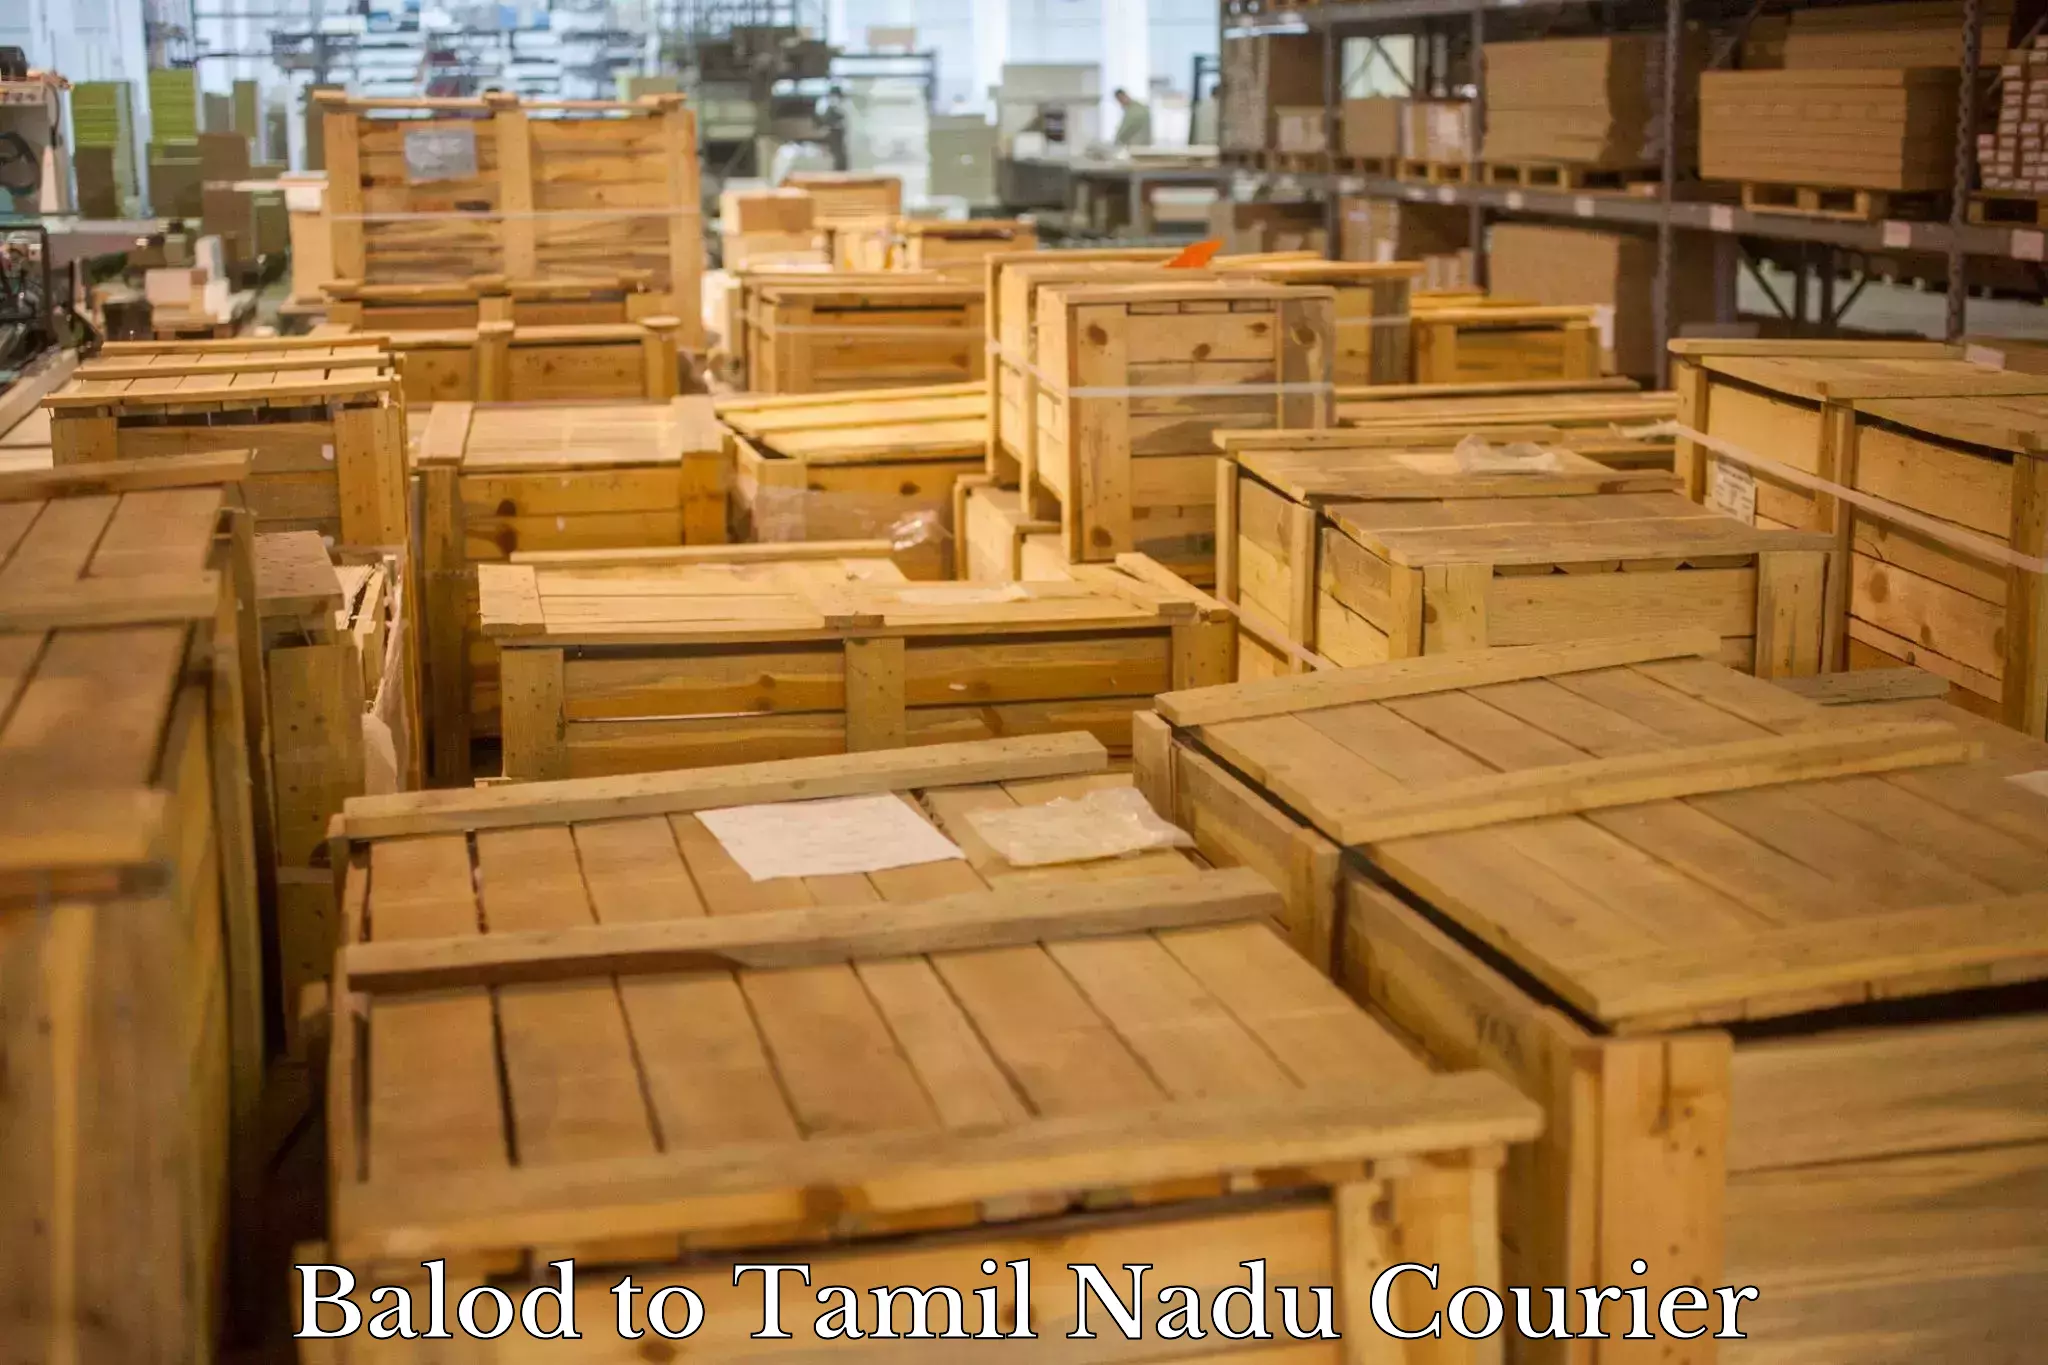 Multi-national courier services Balod to Ennore Port Chennai